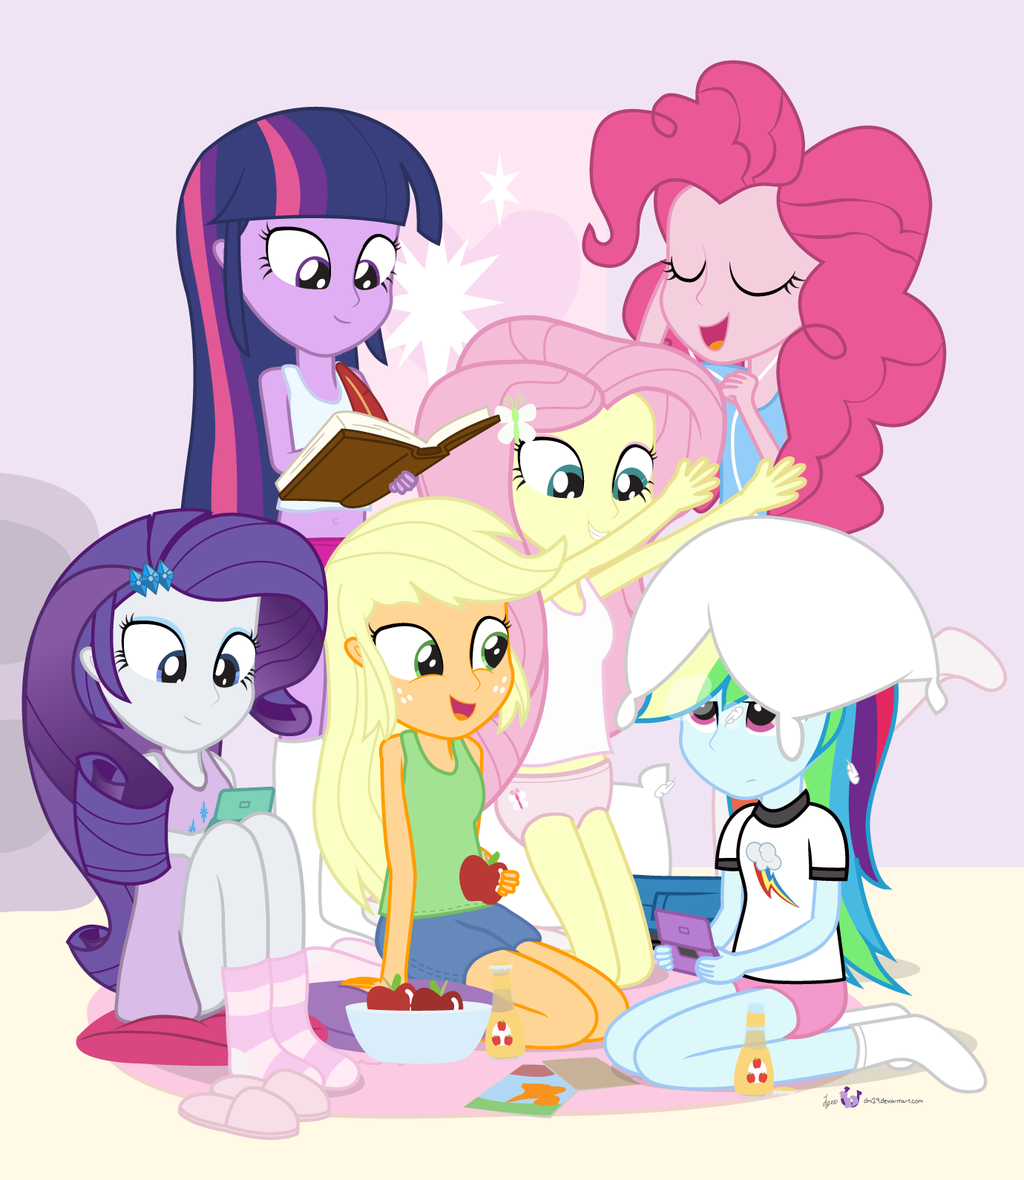 Super Slumber Party Sleepover! by dm29 on Clipart library